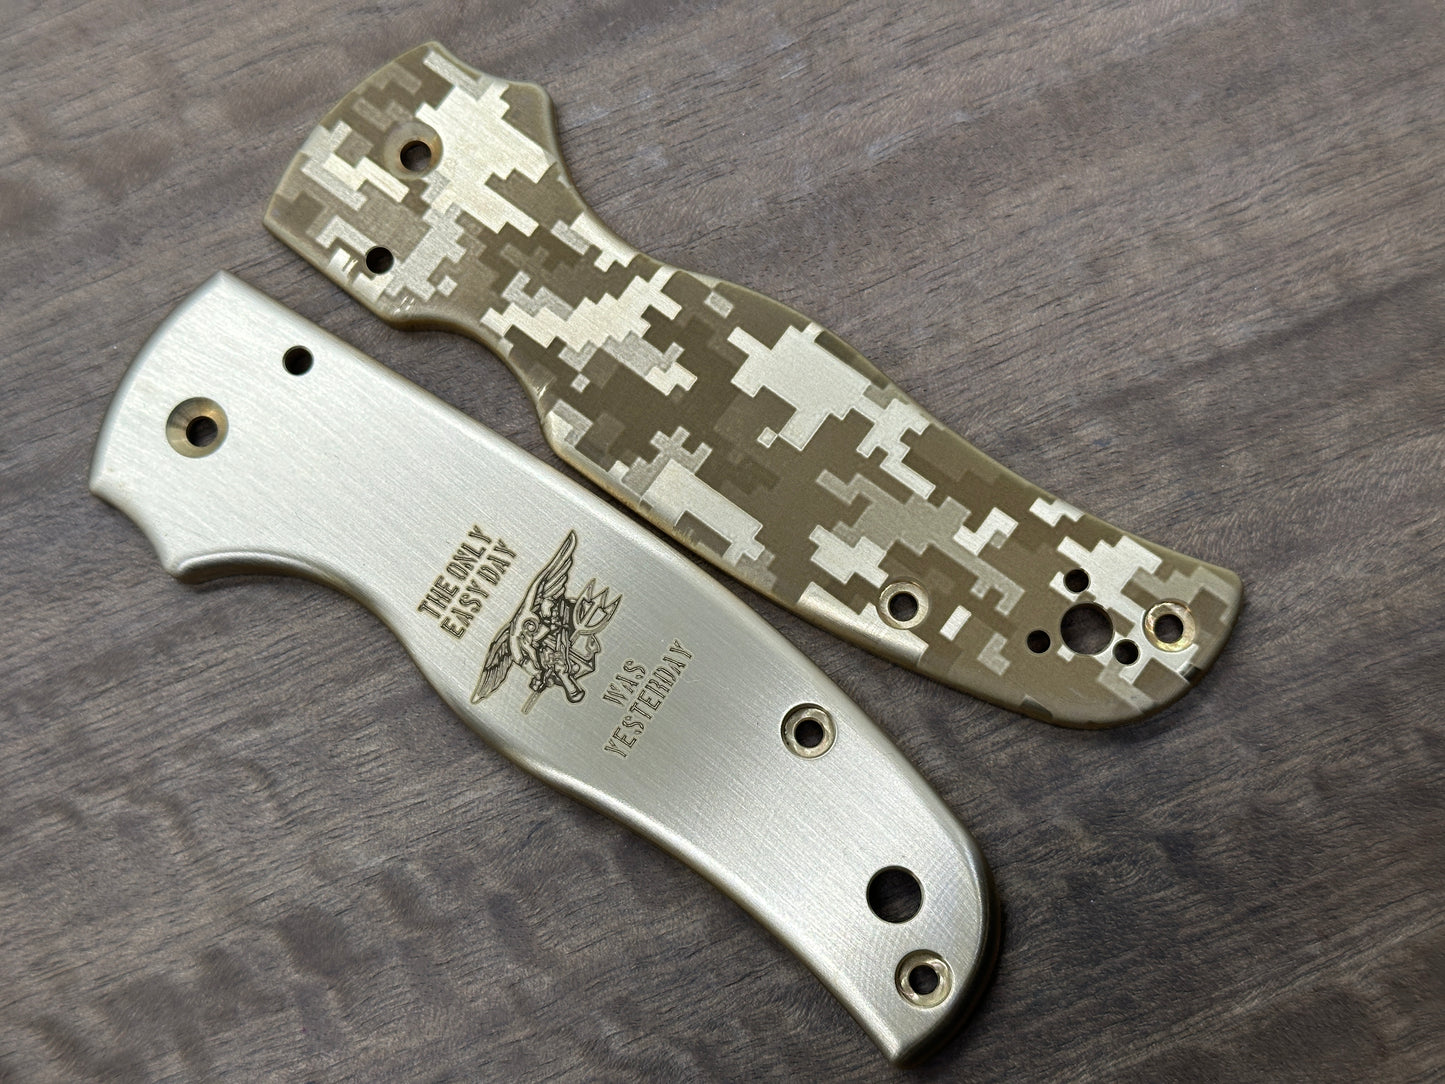 US NAVY Seals "The only easy day was yesterday" Brass Scales for SHAMAN Spyderco